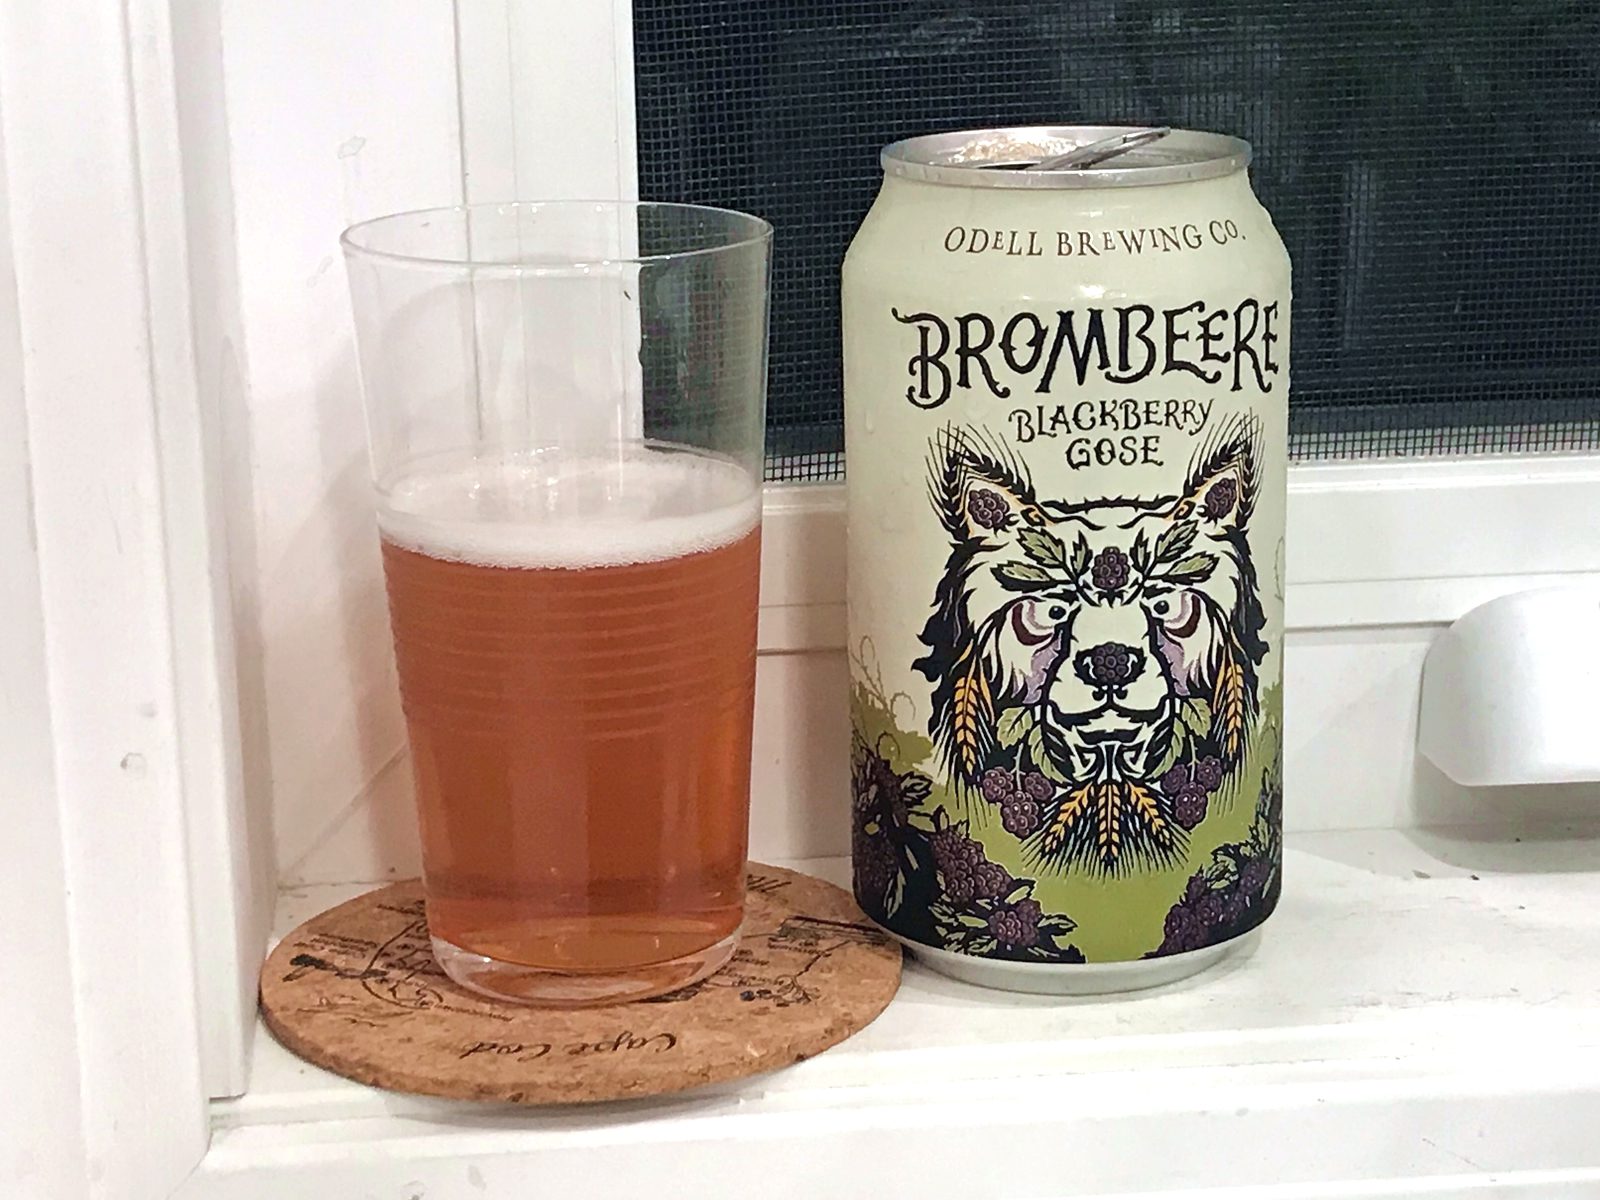 Odell Brewing Company: Brombeere Blackberry Gose